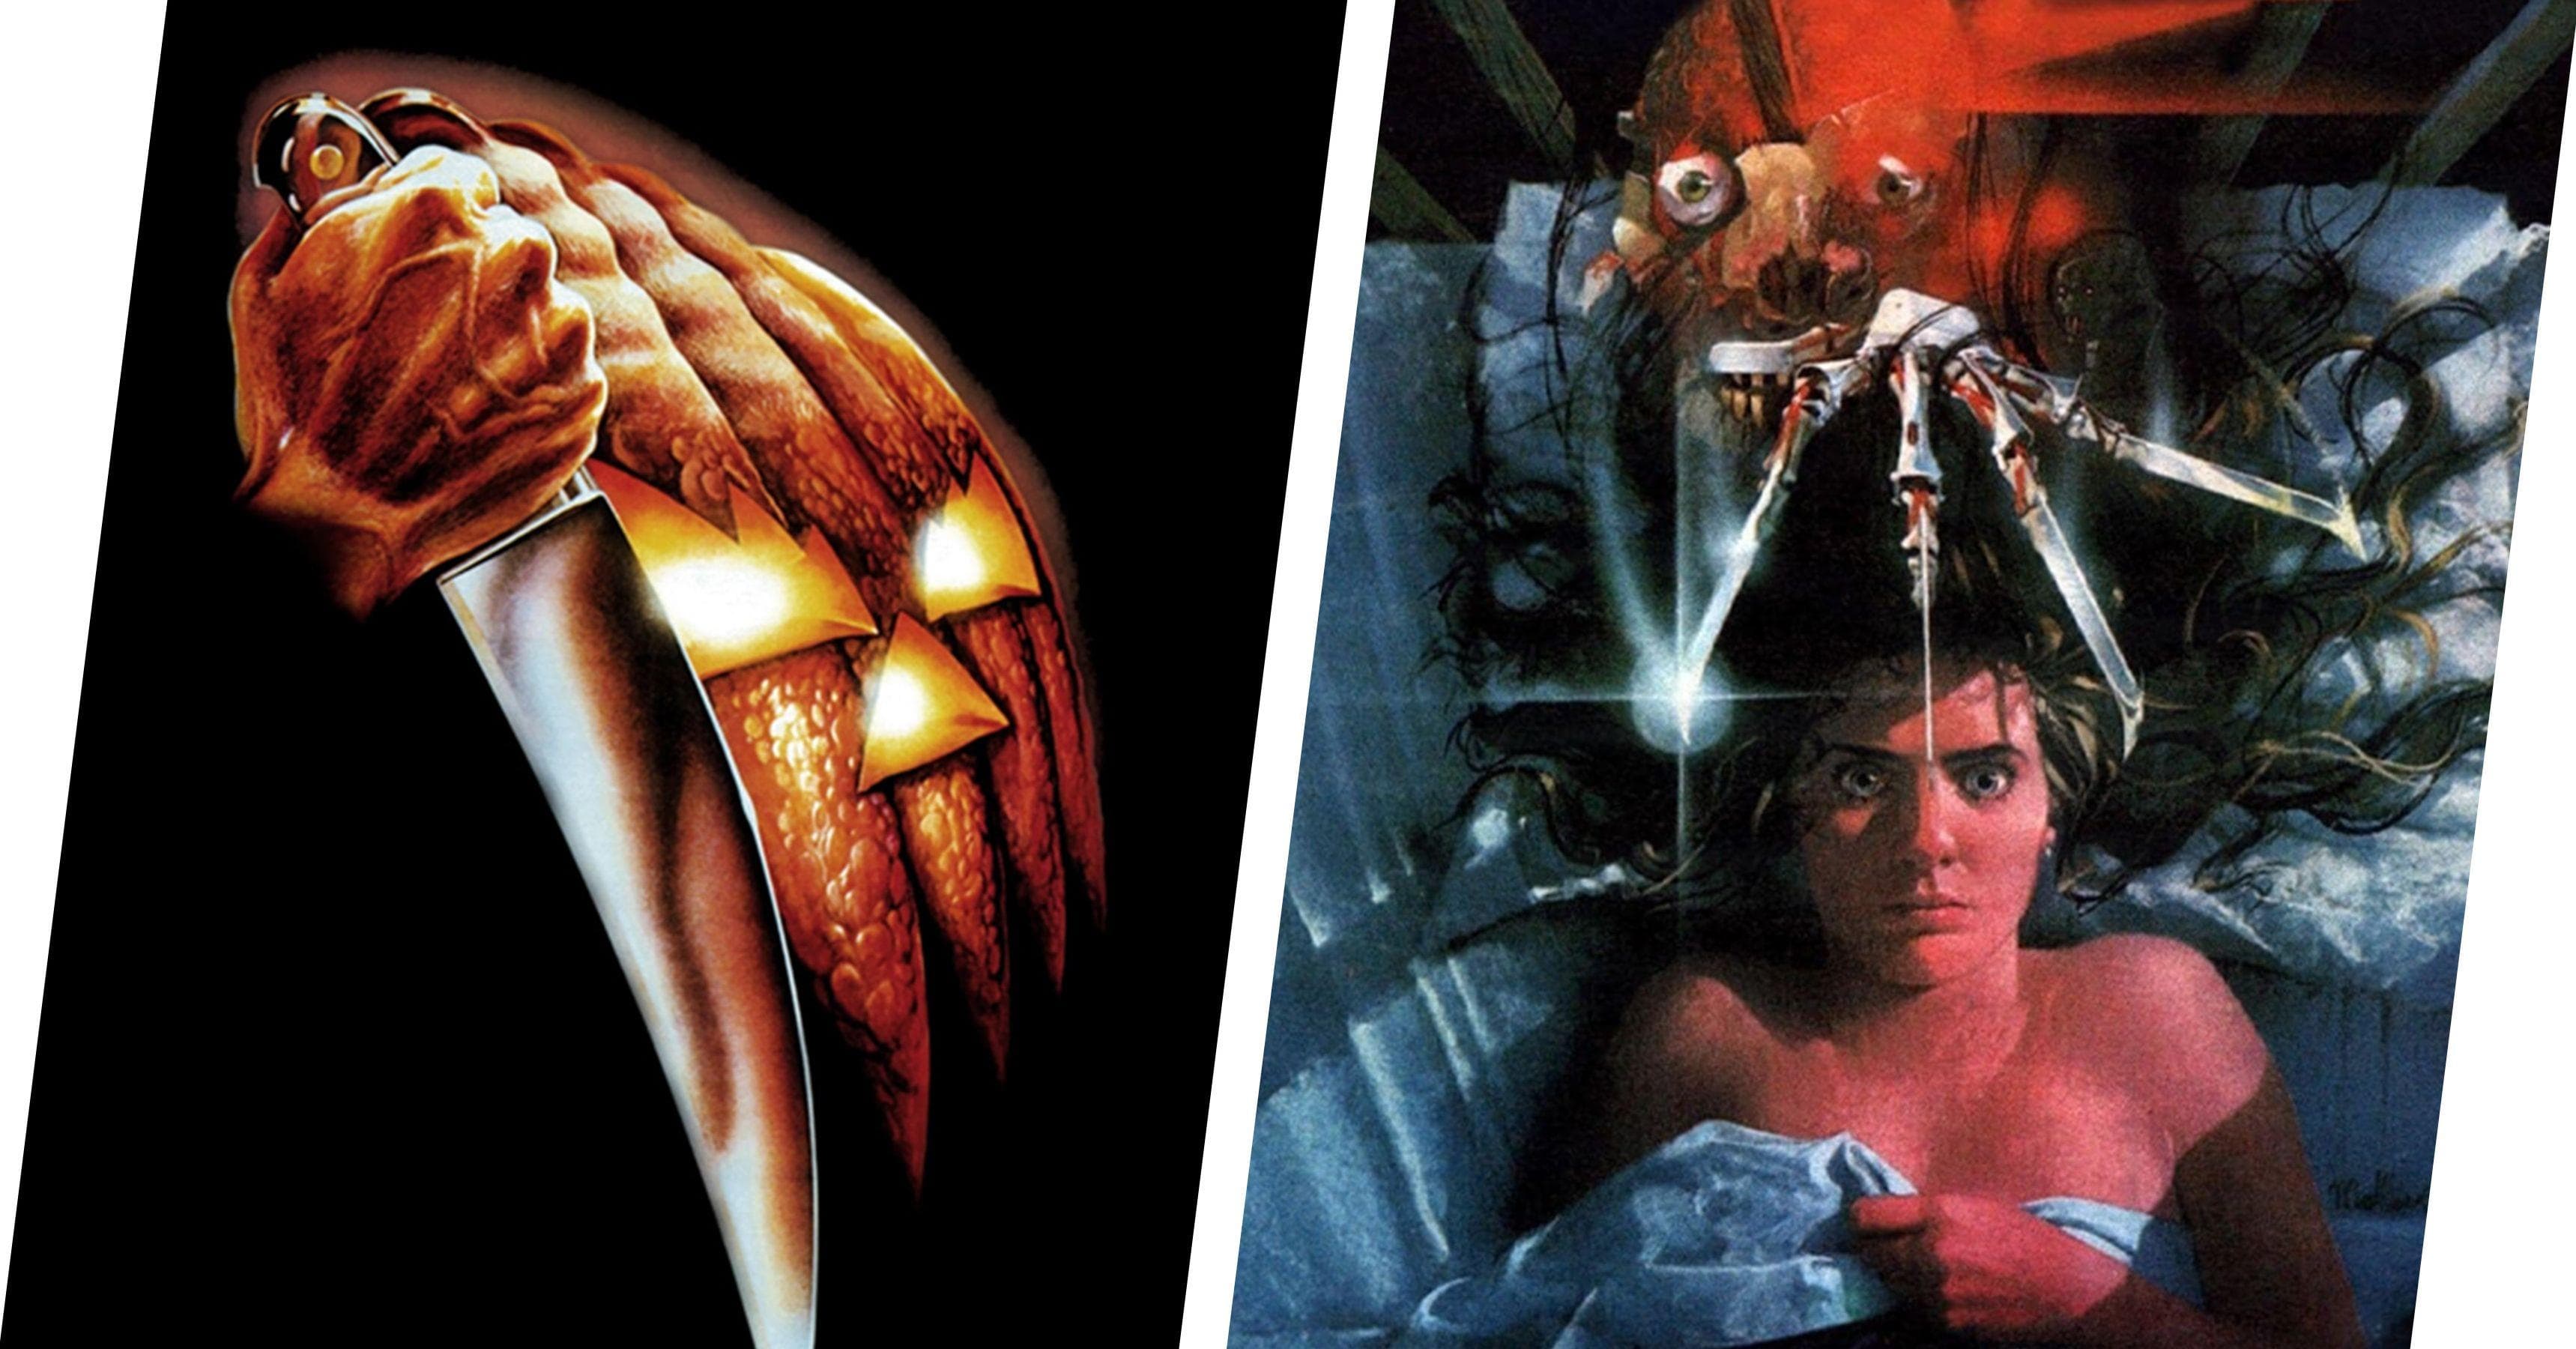 The best slasher movie reboots and requels to watch on Halloween